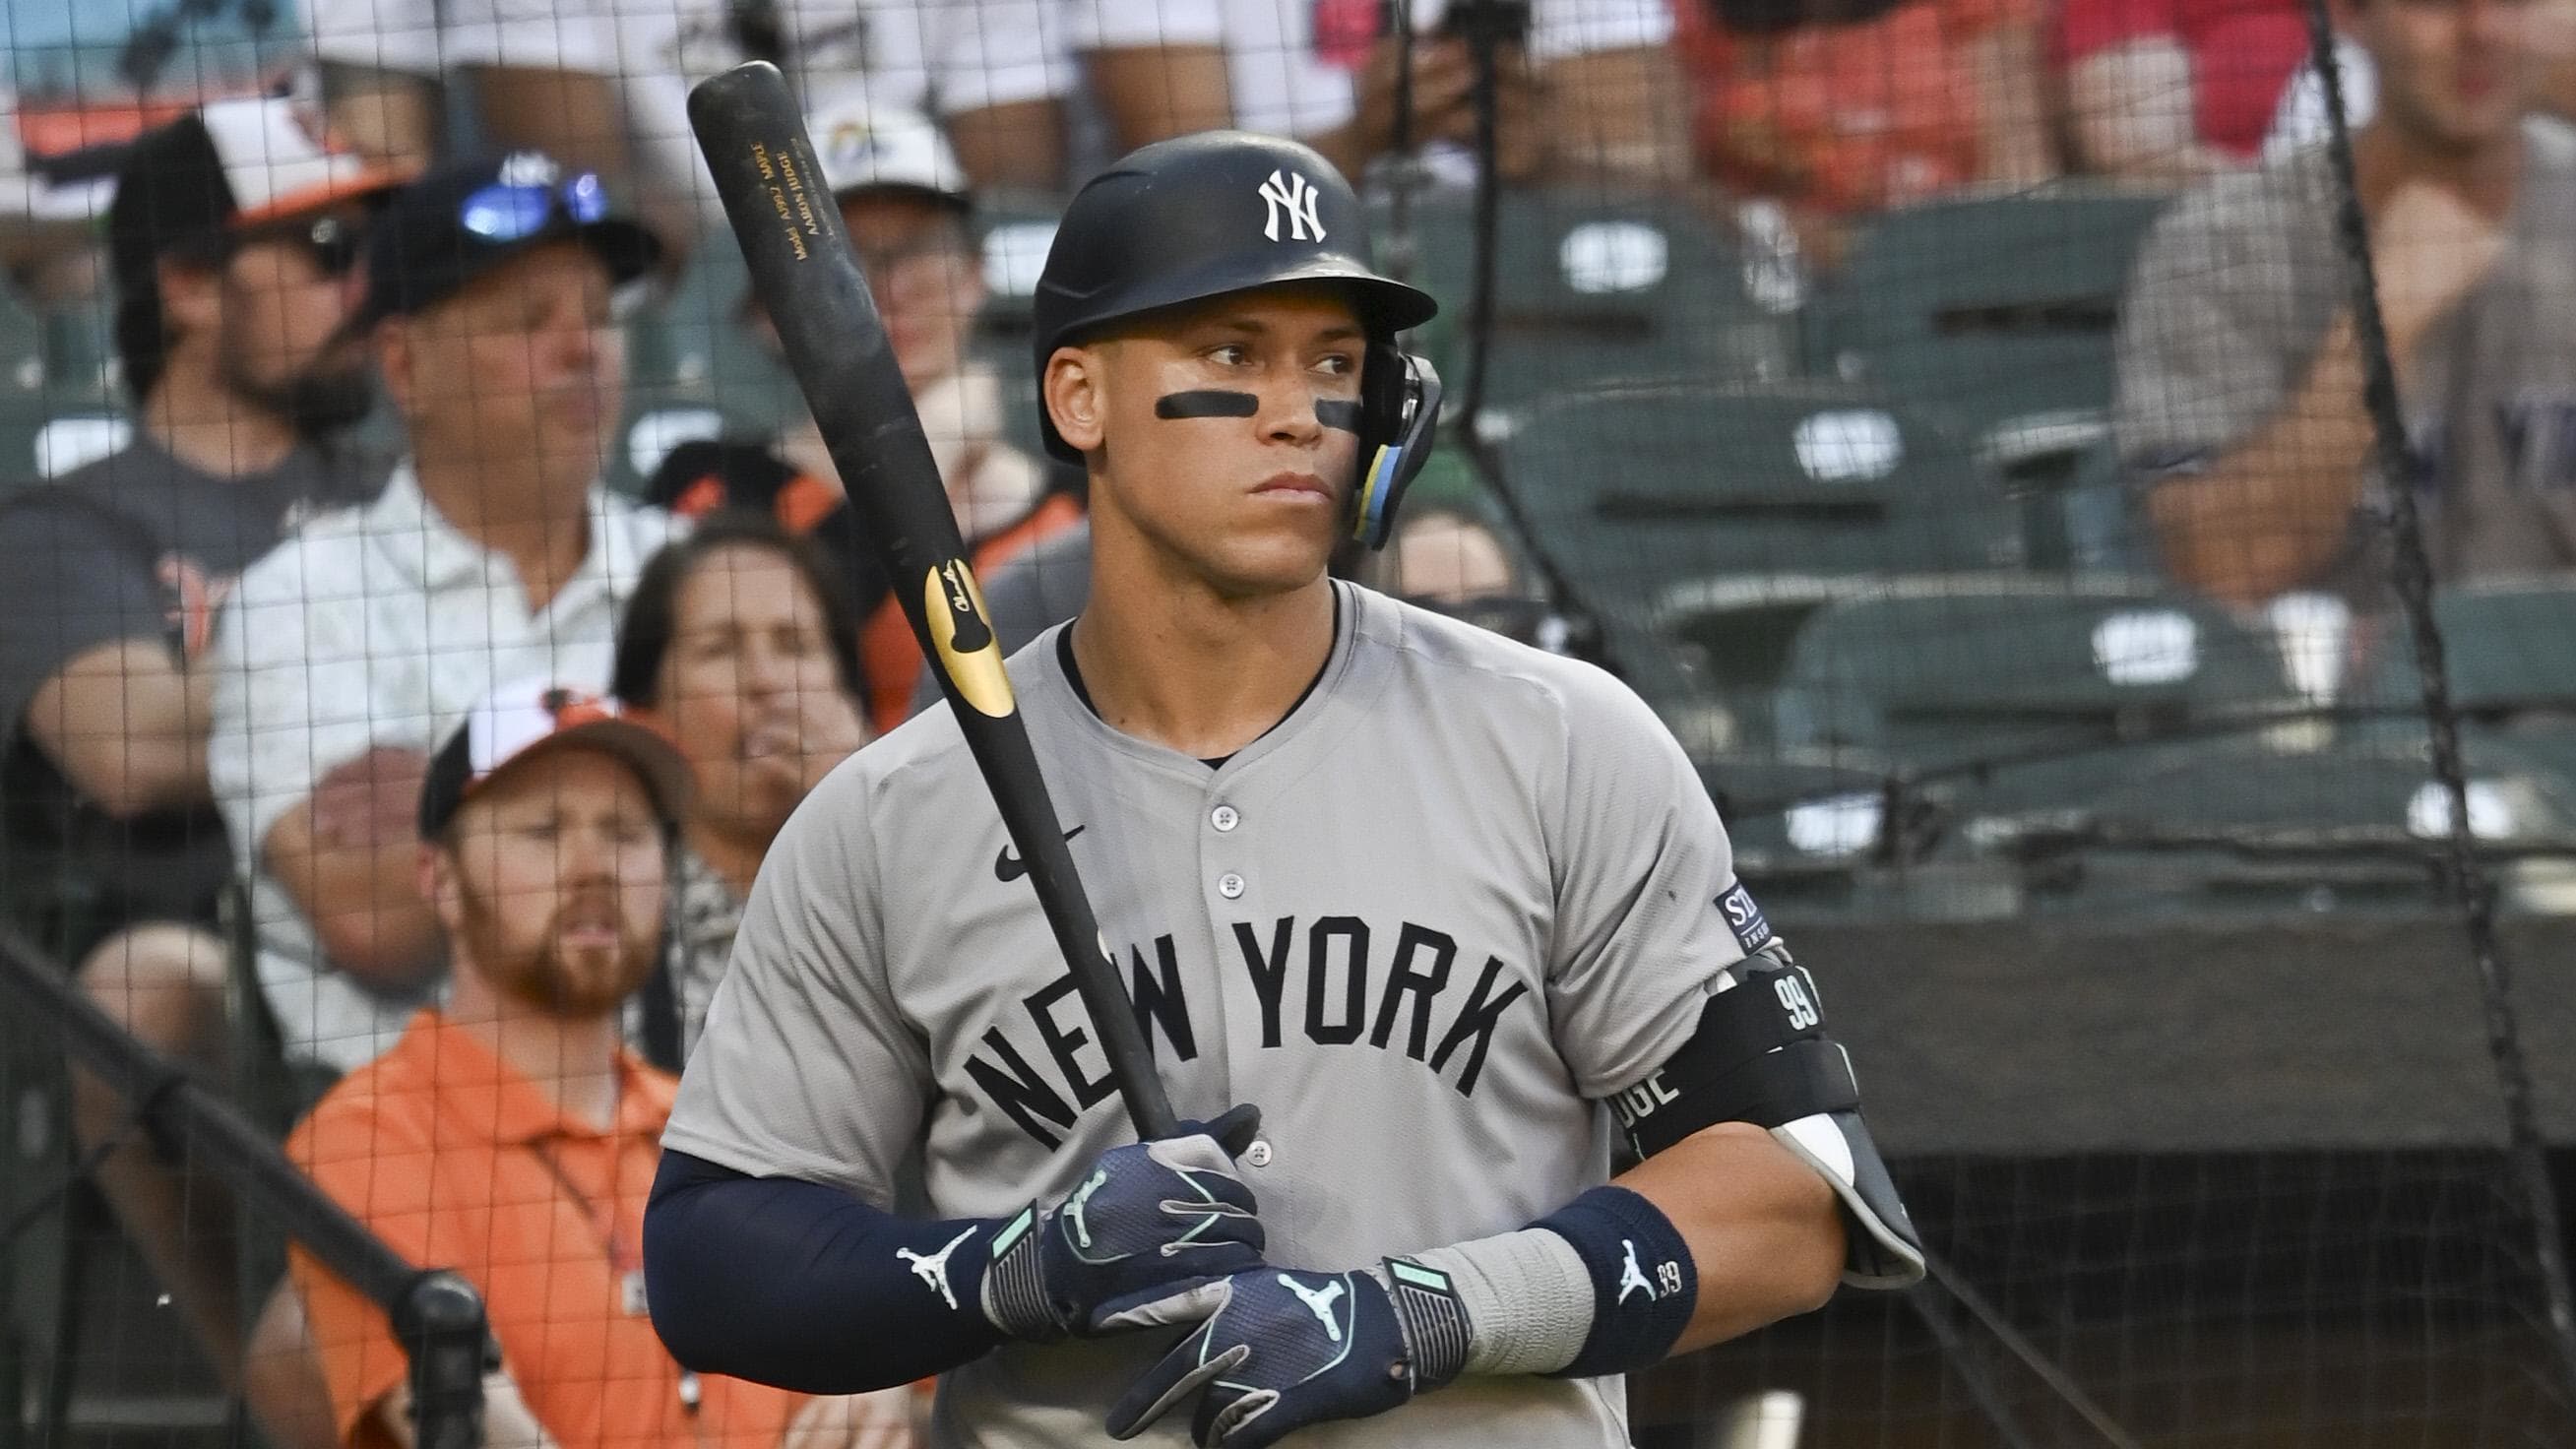  New York Yankees outfielder Aaron Judge (99) awaits a pitch against the Orioles.